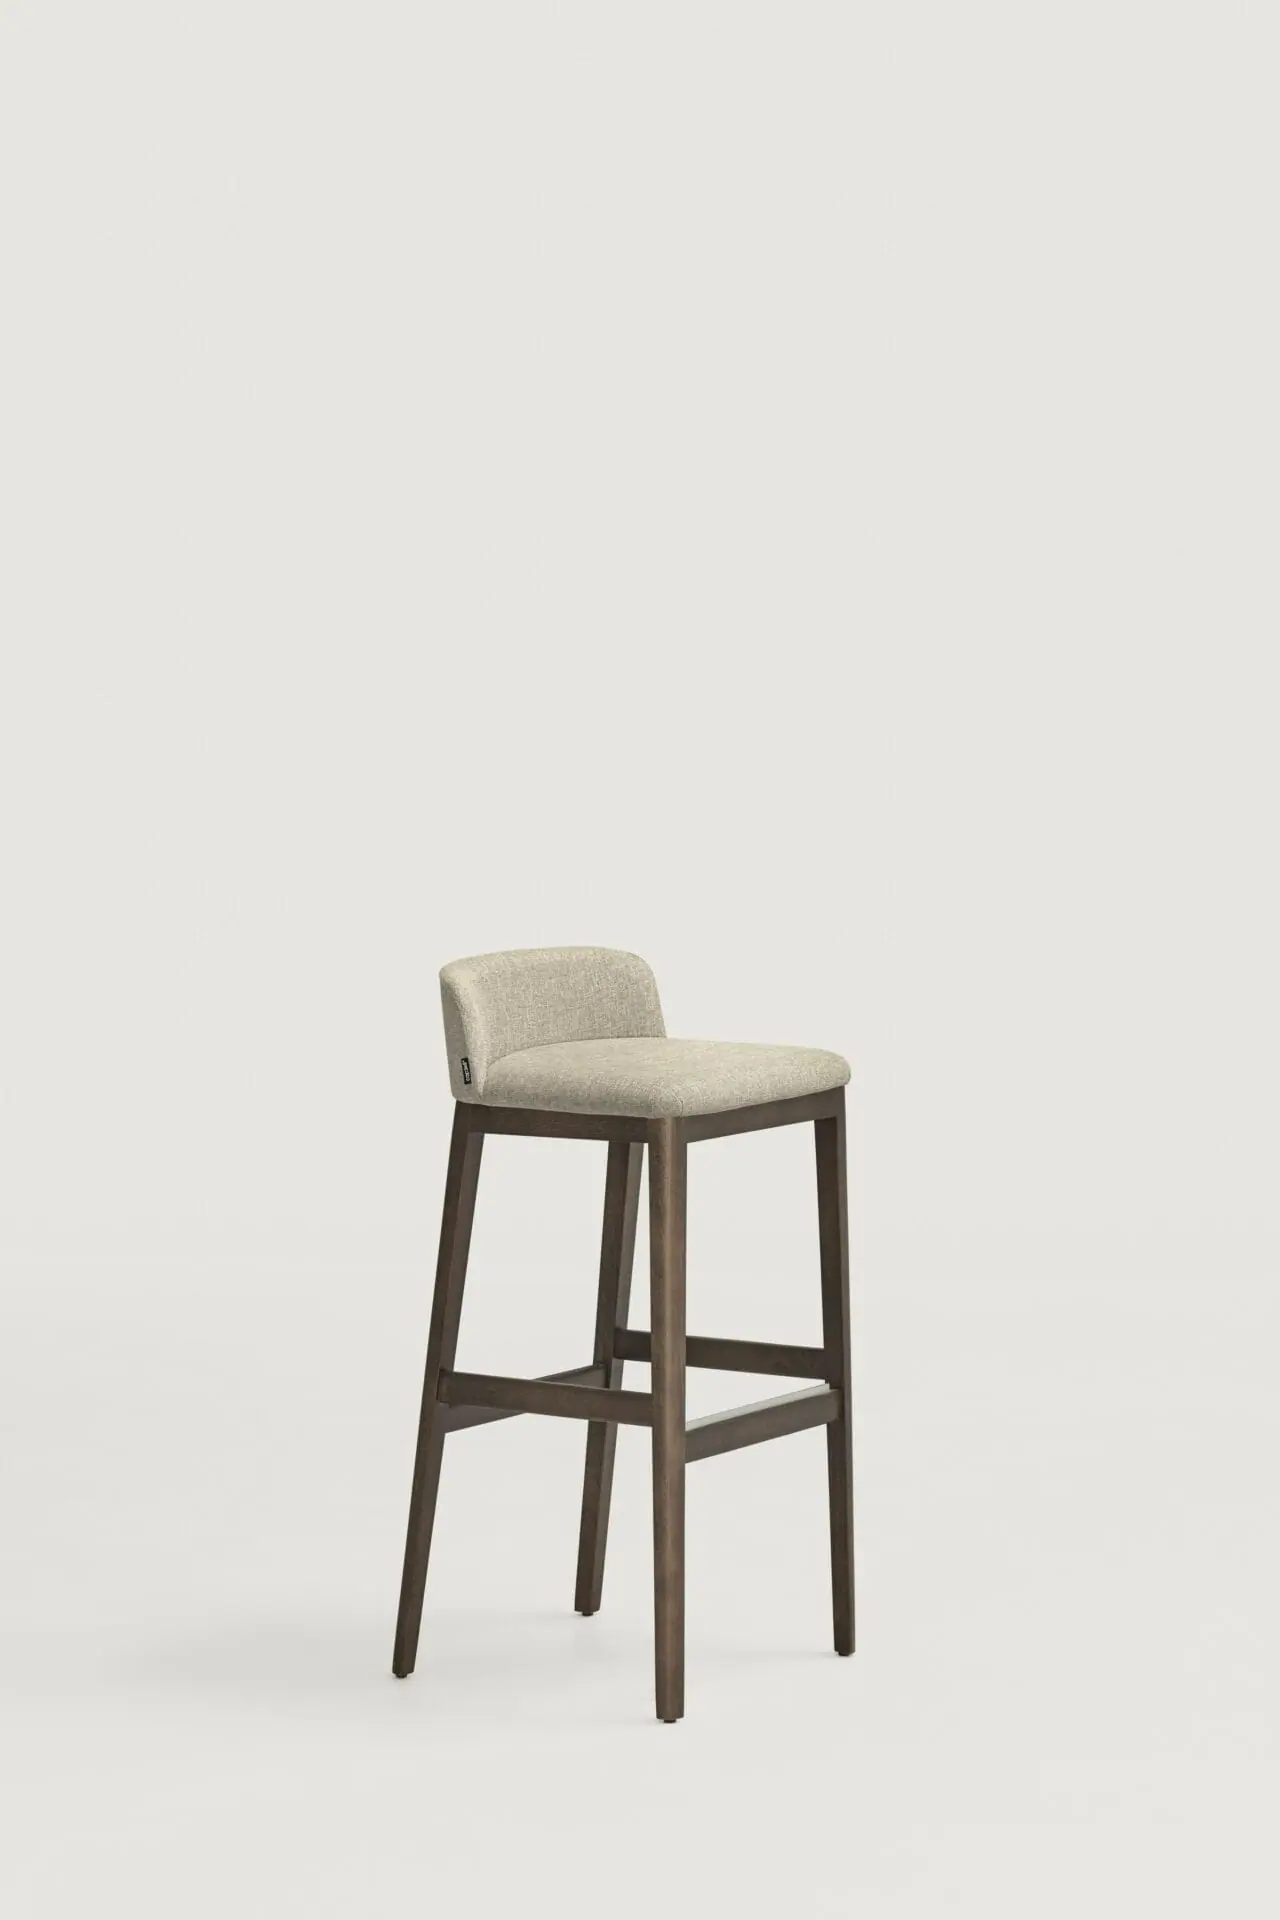 capdell-concord-stool-04